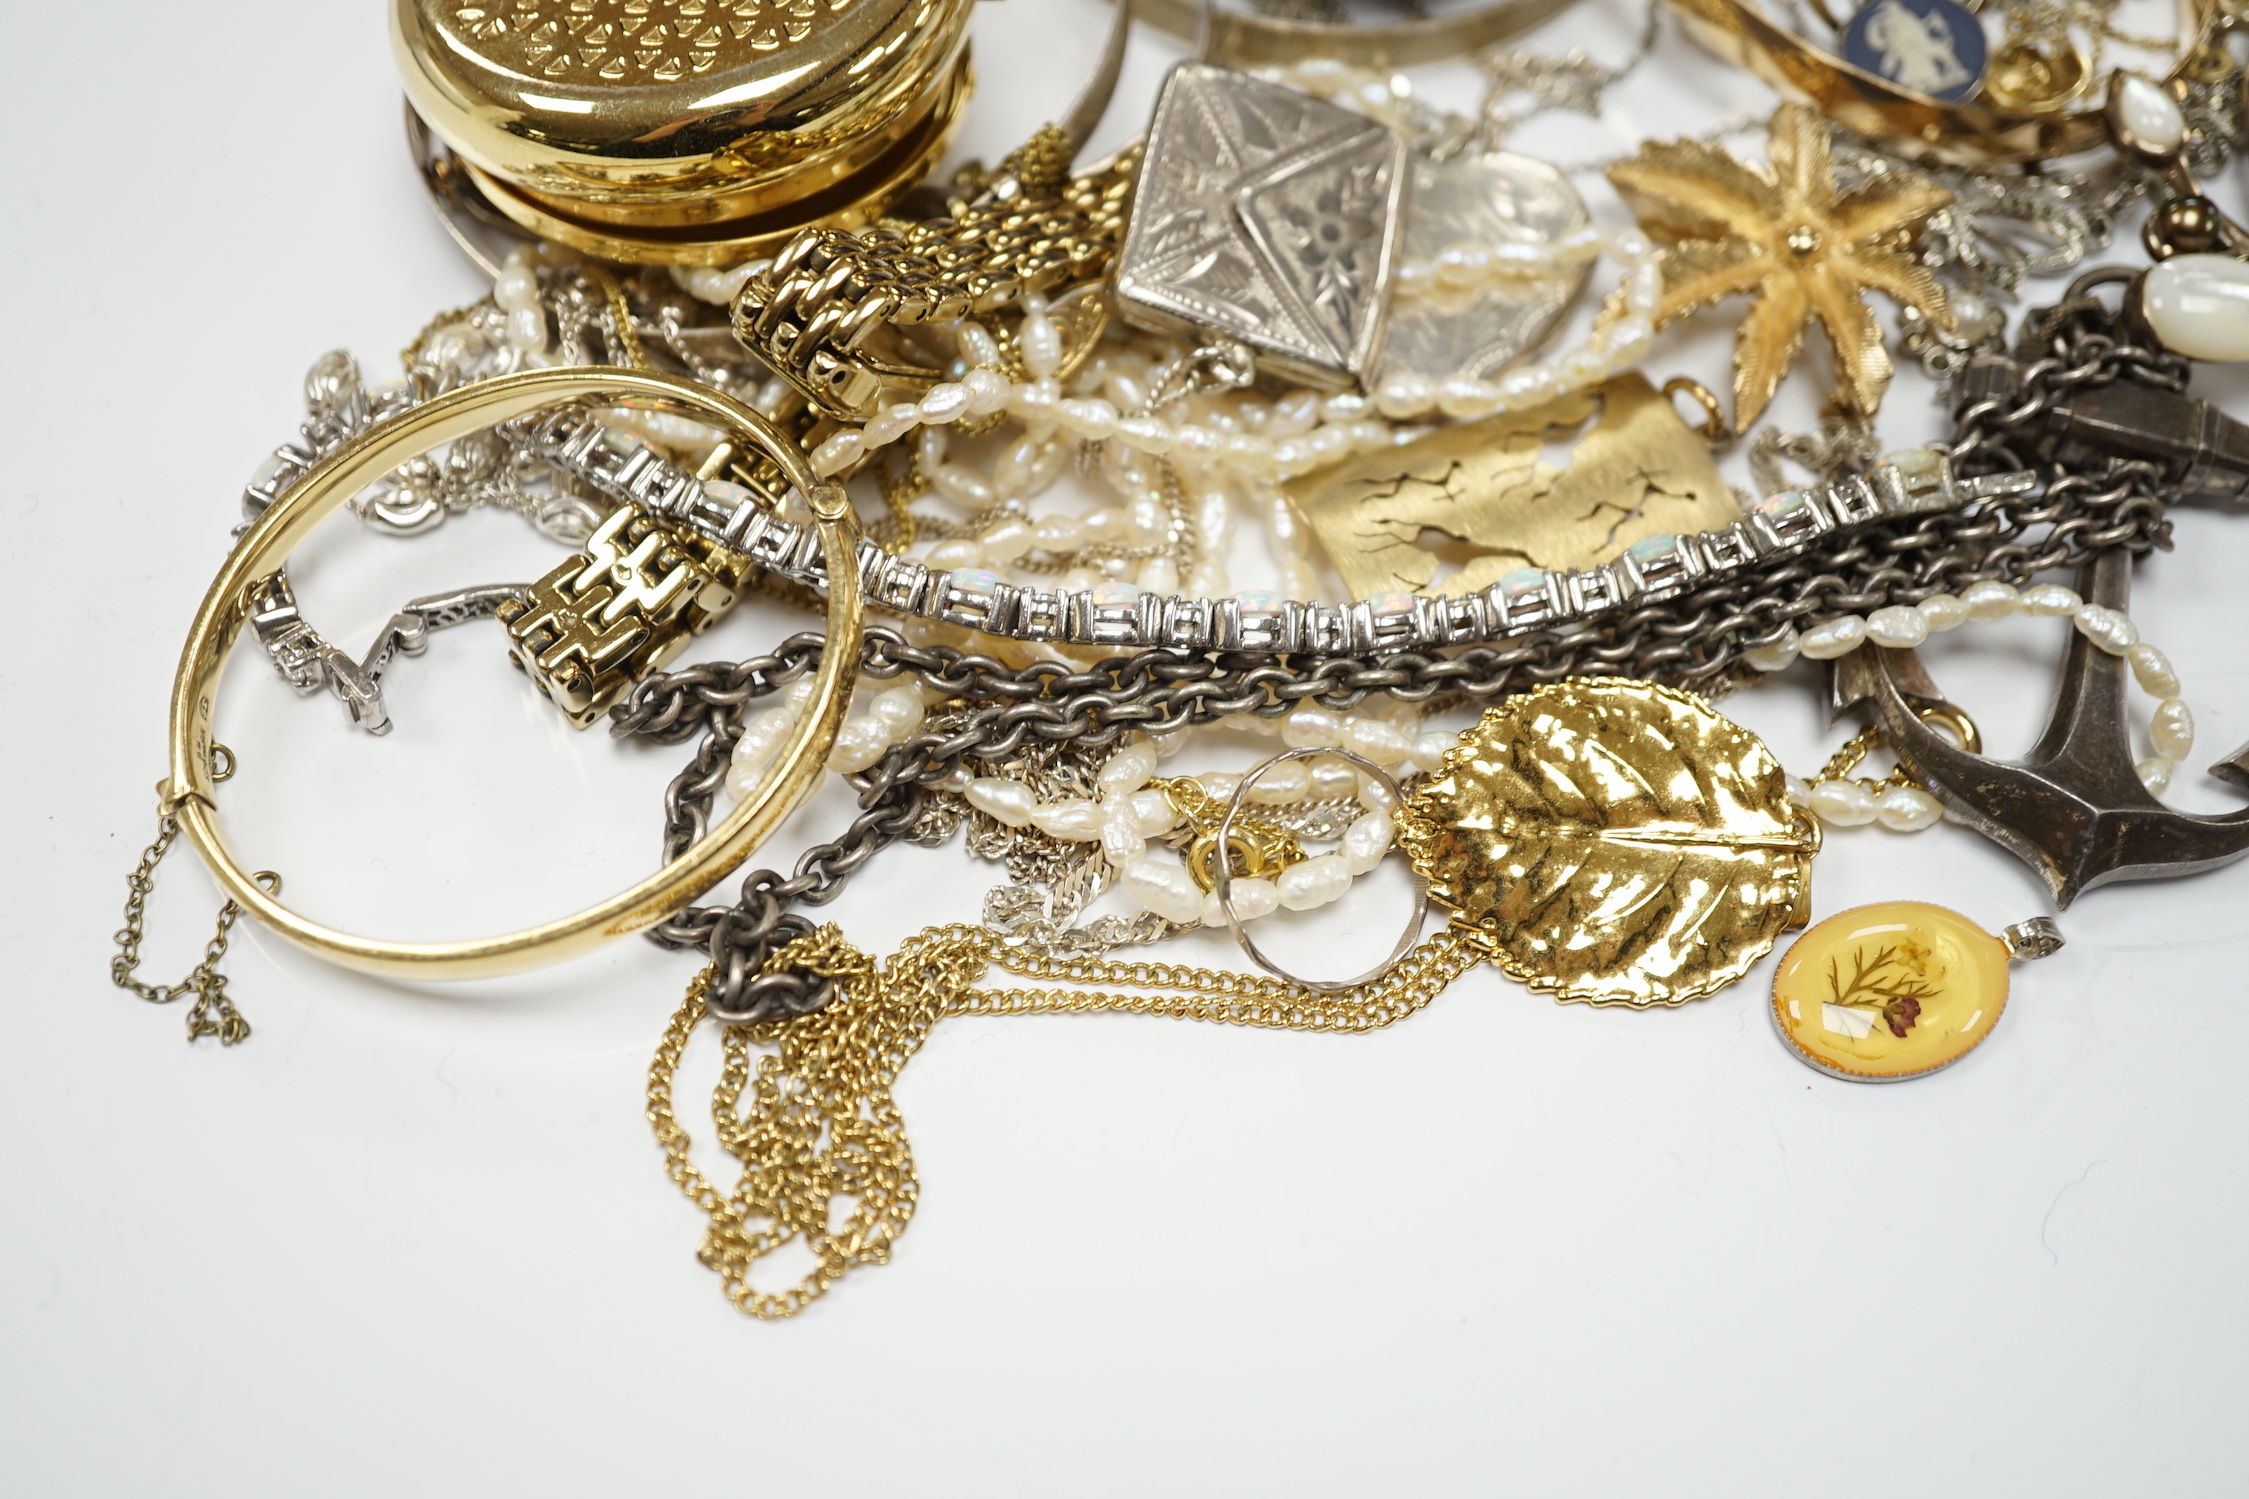 A quantity of assorted costume and silver jewellery including pendants, locket, bracelets, bangles, chains etc.